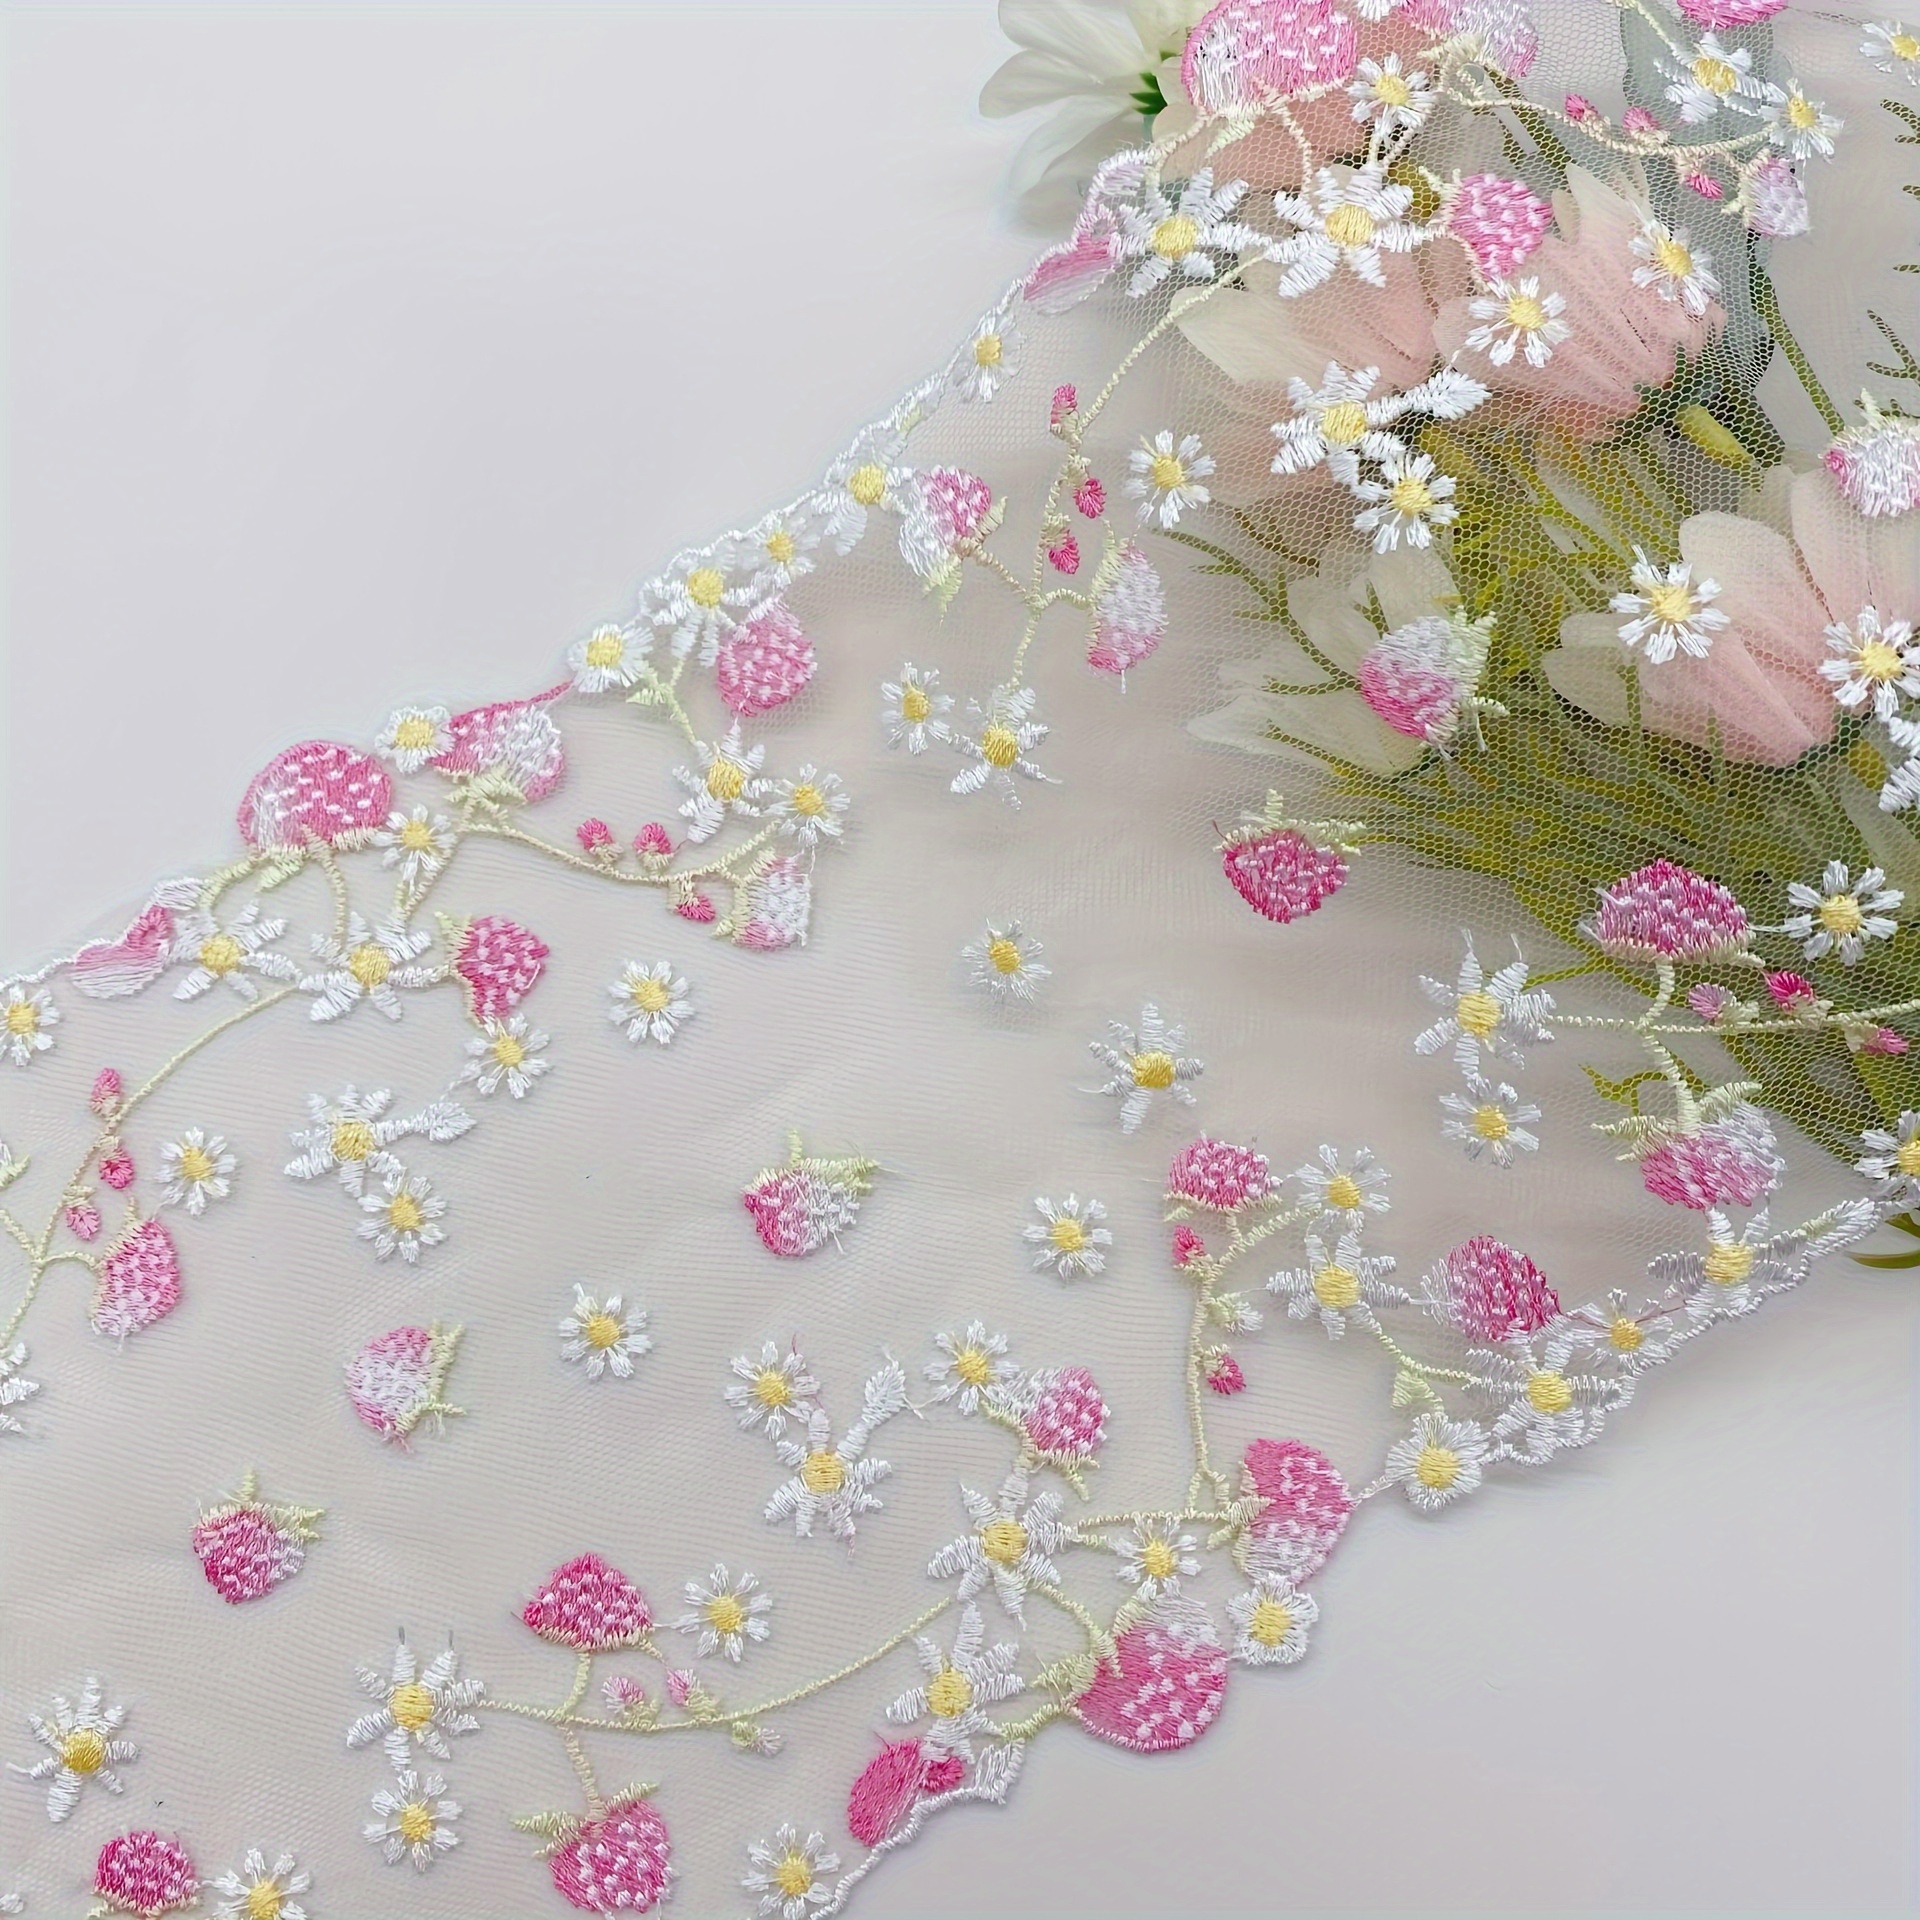 

luxurious Embroidery" Peach Embroidered Lace Trim, 6.8" Wide Mesh Yarn Strip For Diy Wedding Dresses, Cheongsam, Pajamas, Lingerie, Curtains & Home Decor - 1 Yard